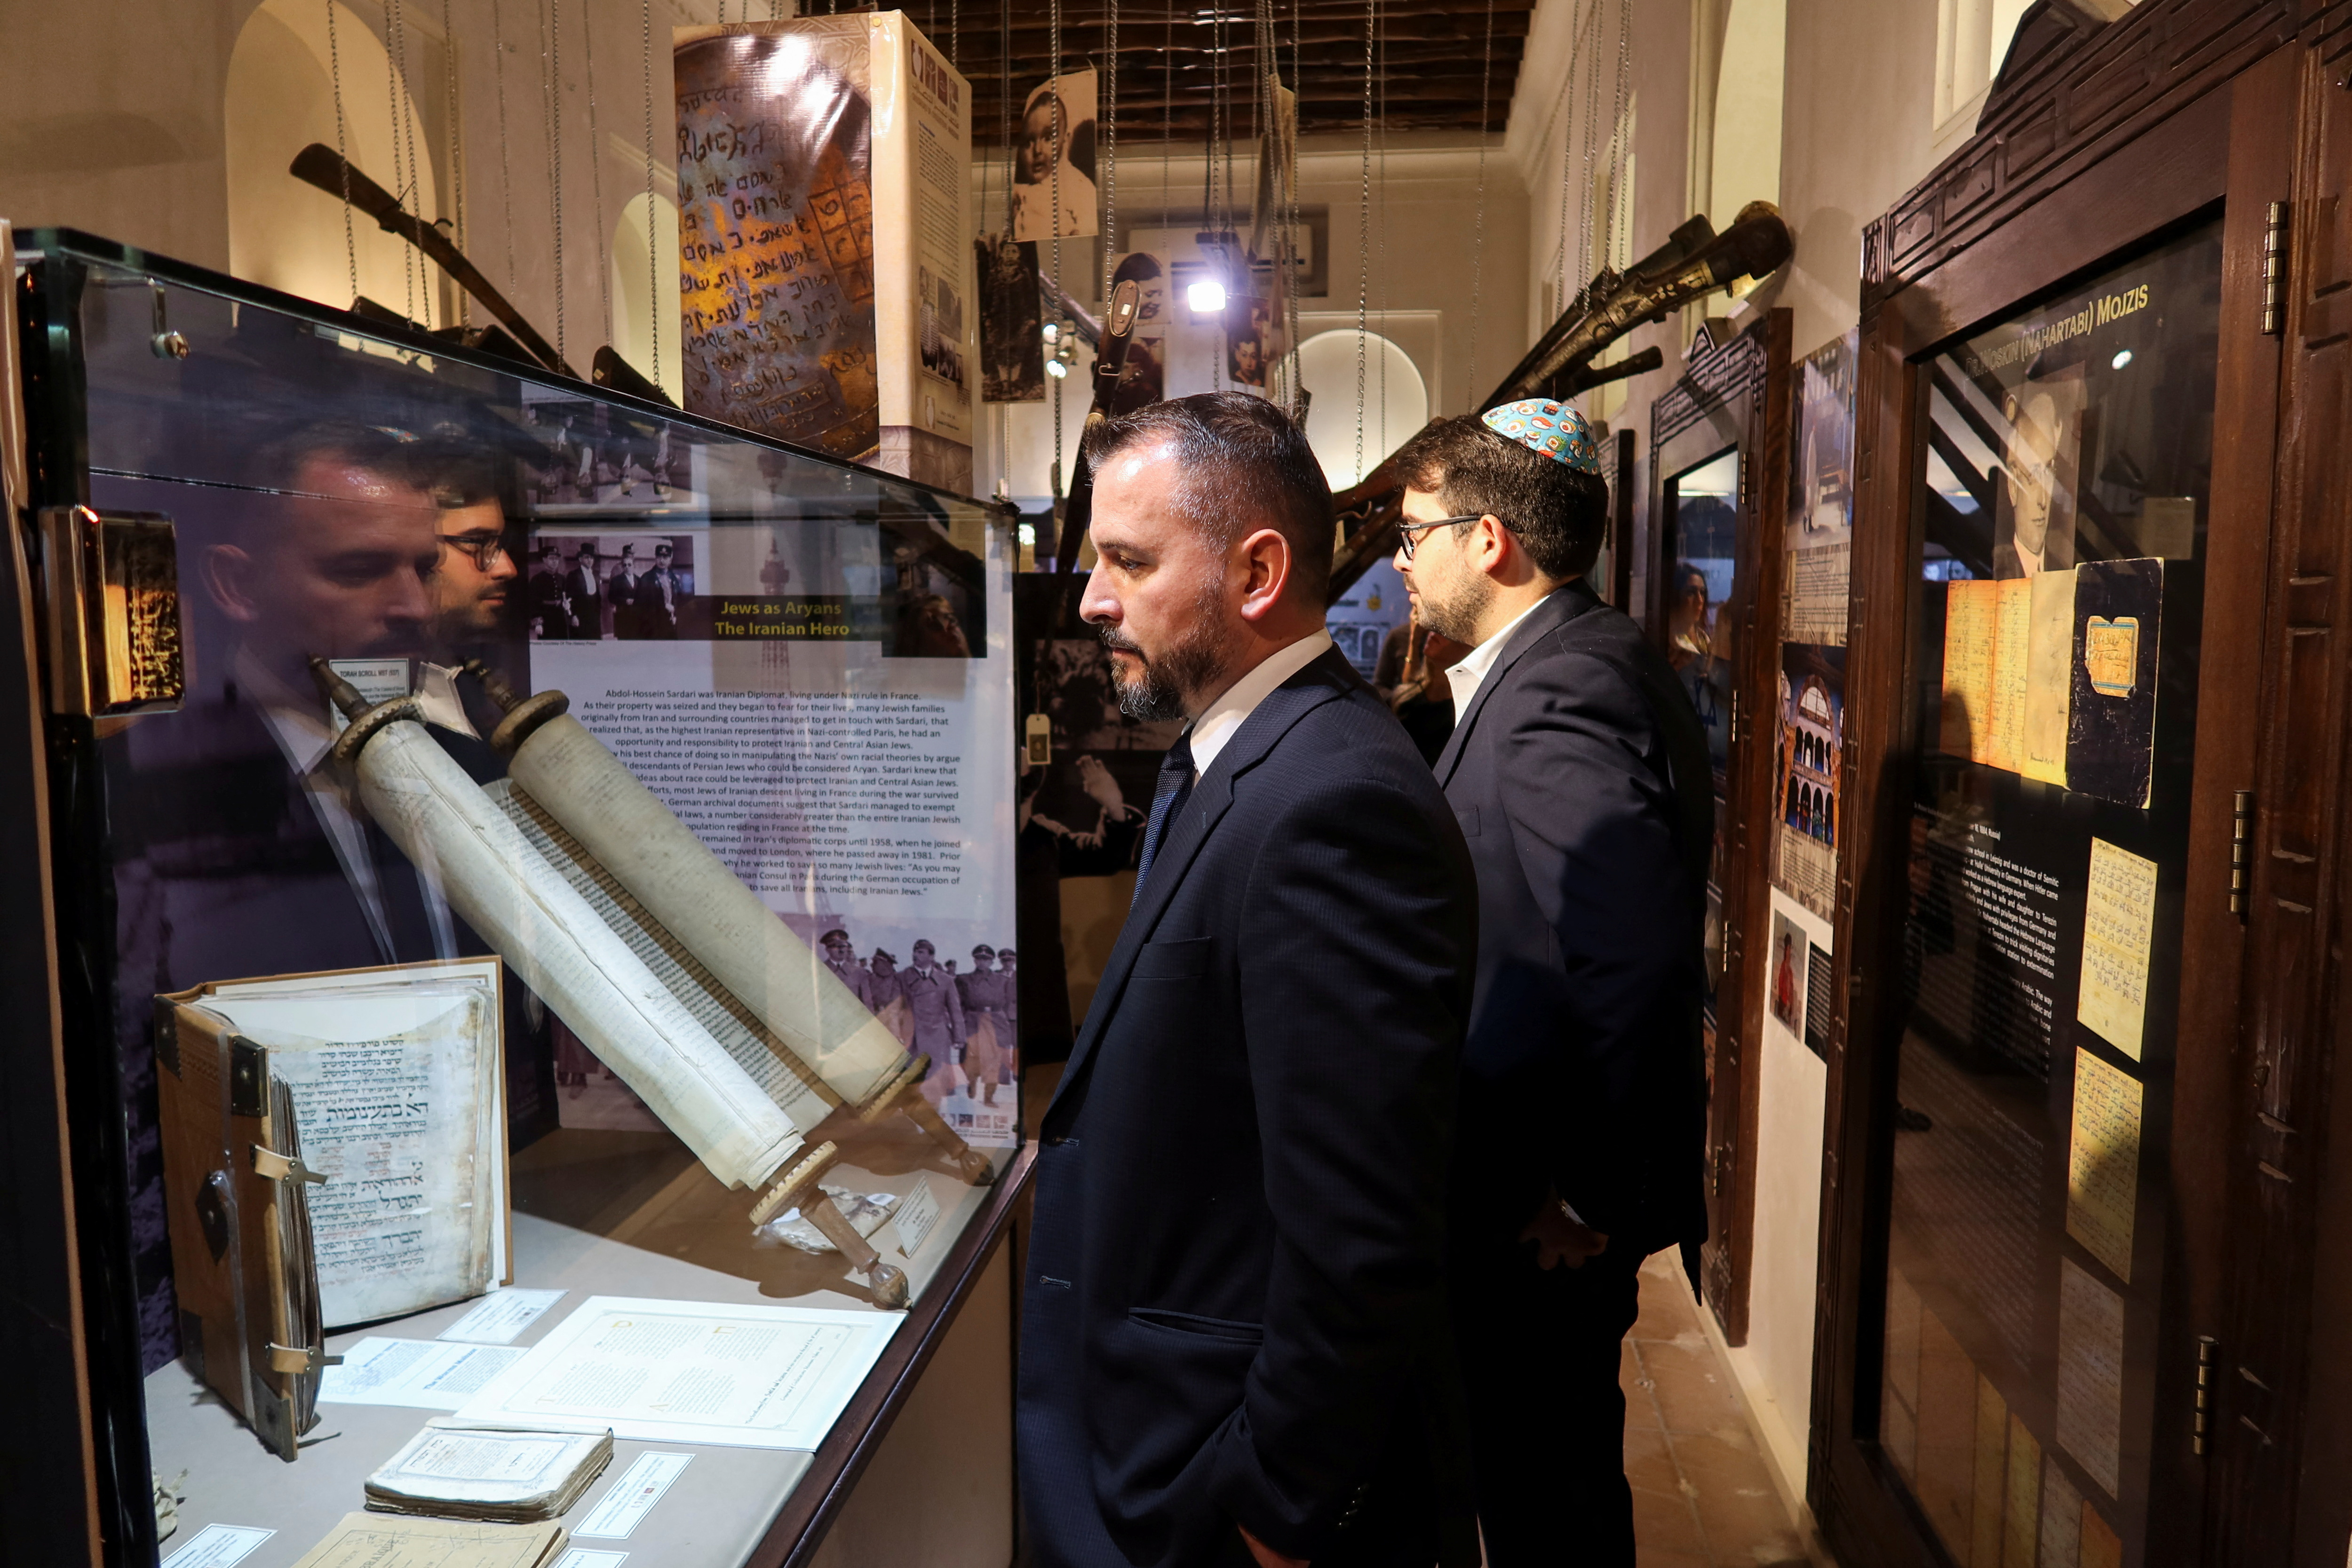 Visitors attend an event commemorating the Holocaust at Crossroad of Civilizations Museum, in Dubai